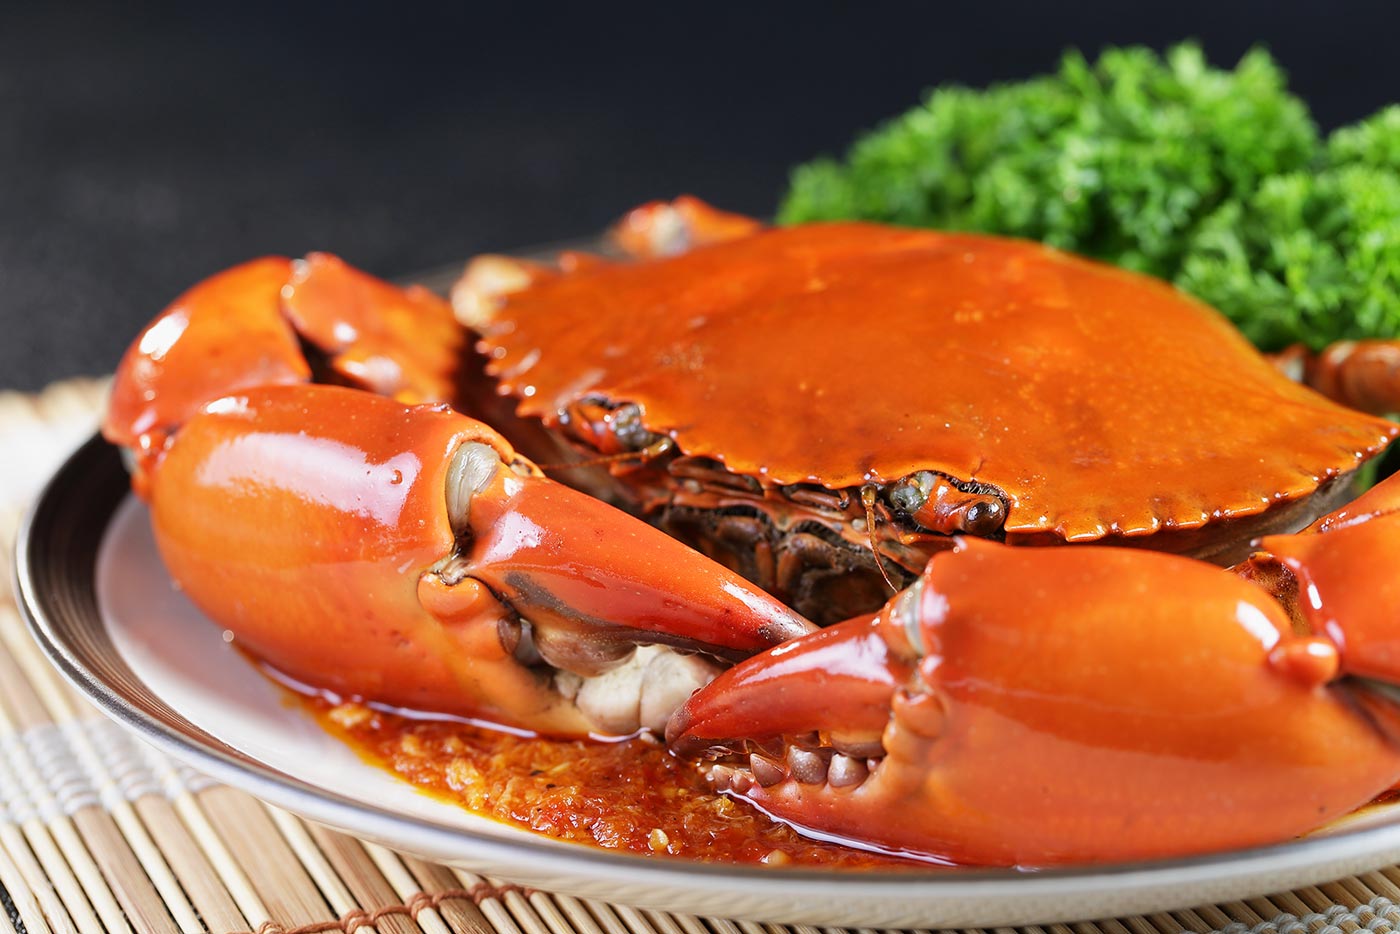 The 5 best places in Singapore to eat the chilli crab